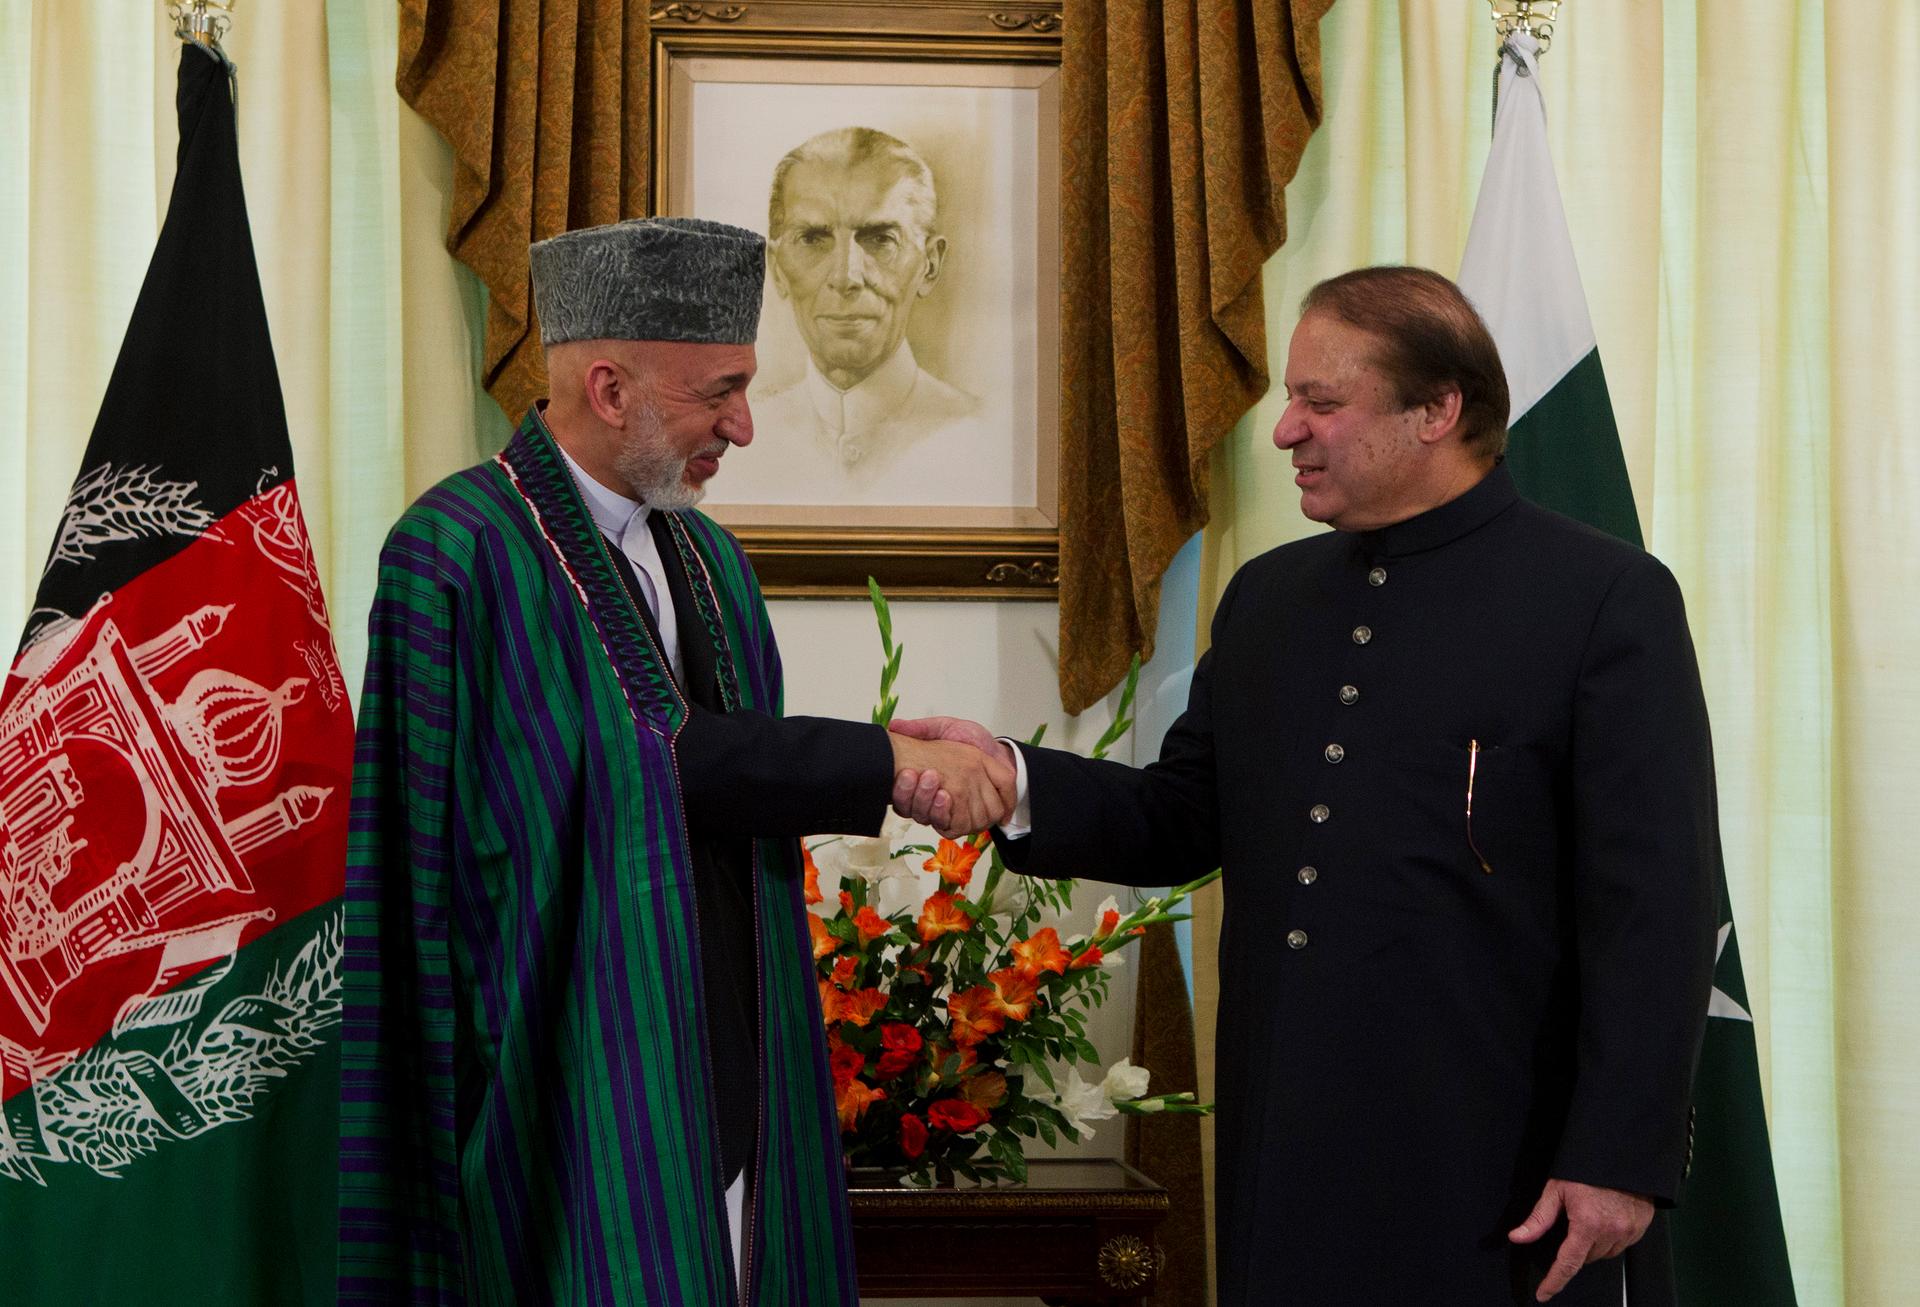 Afghan President Hamid Karzai shakes hands with Pakistan's Prime Minister Nawaz Sharif at the prime minister's residence in Islamabad